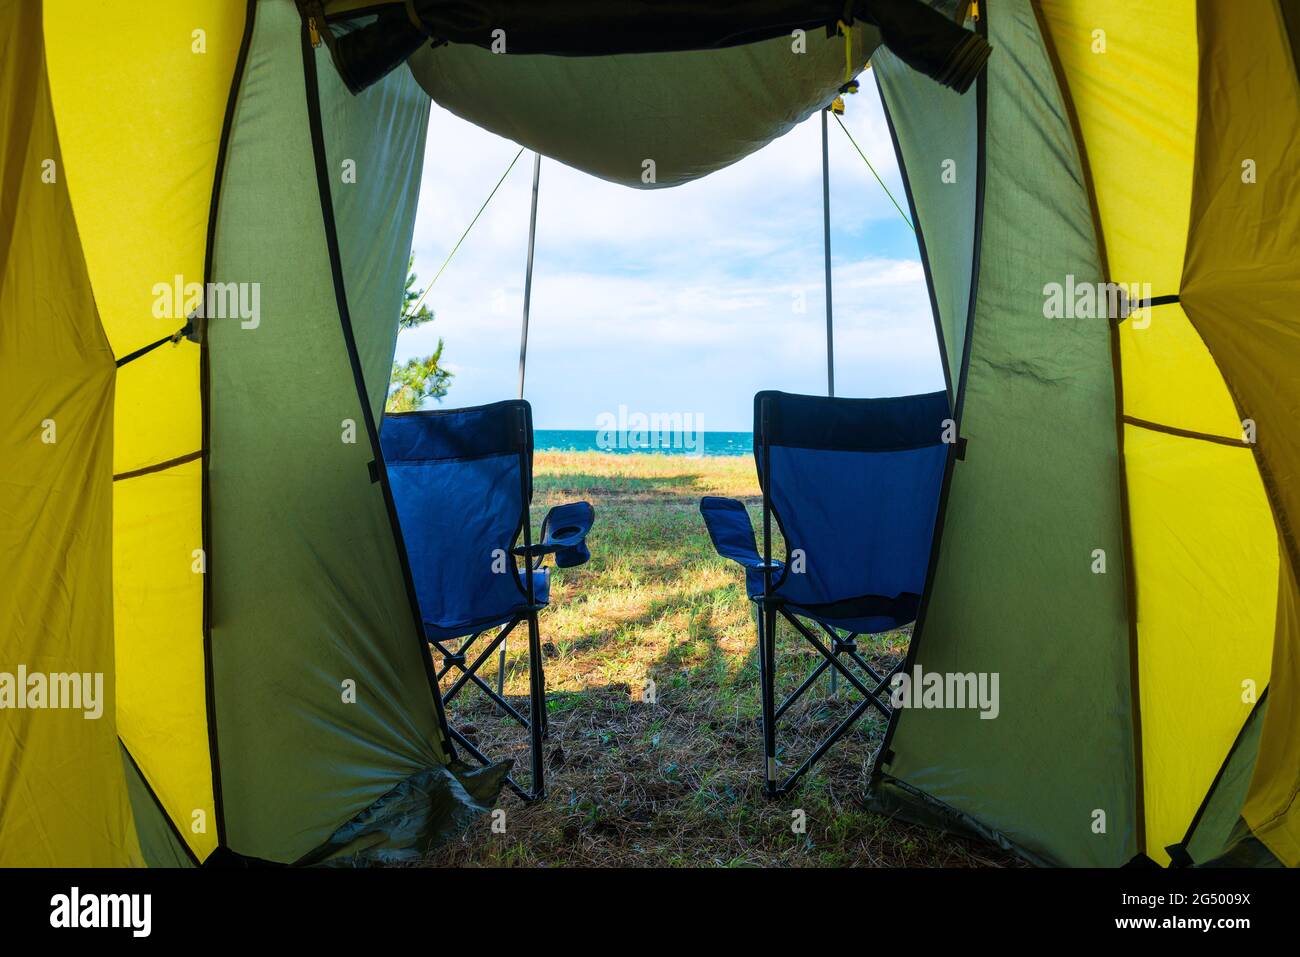 Concept vacation, camping, relaxation - sea view from a camping tent Stock Photo